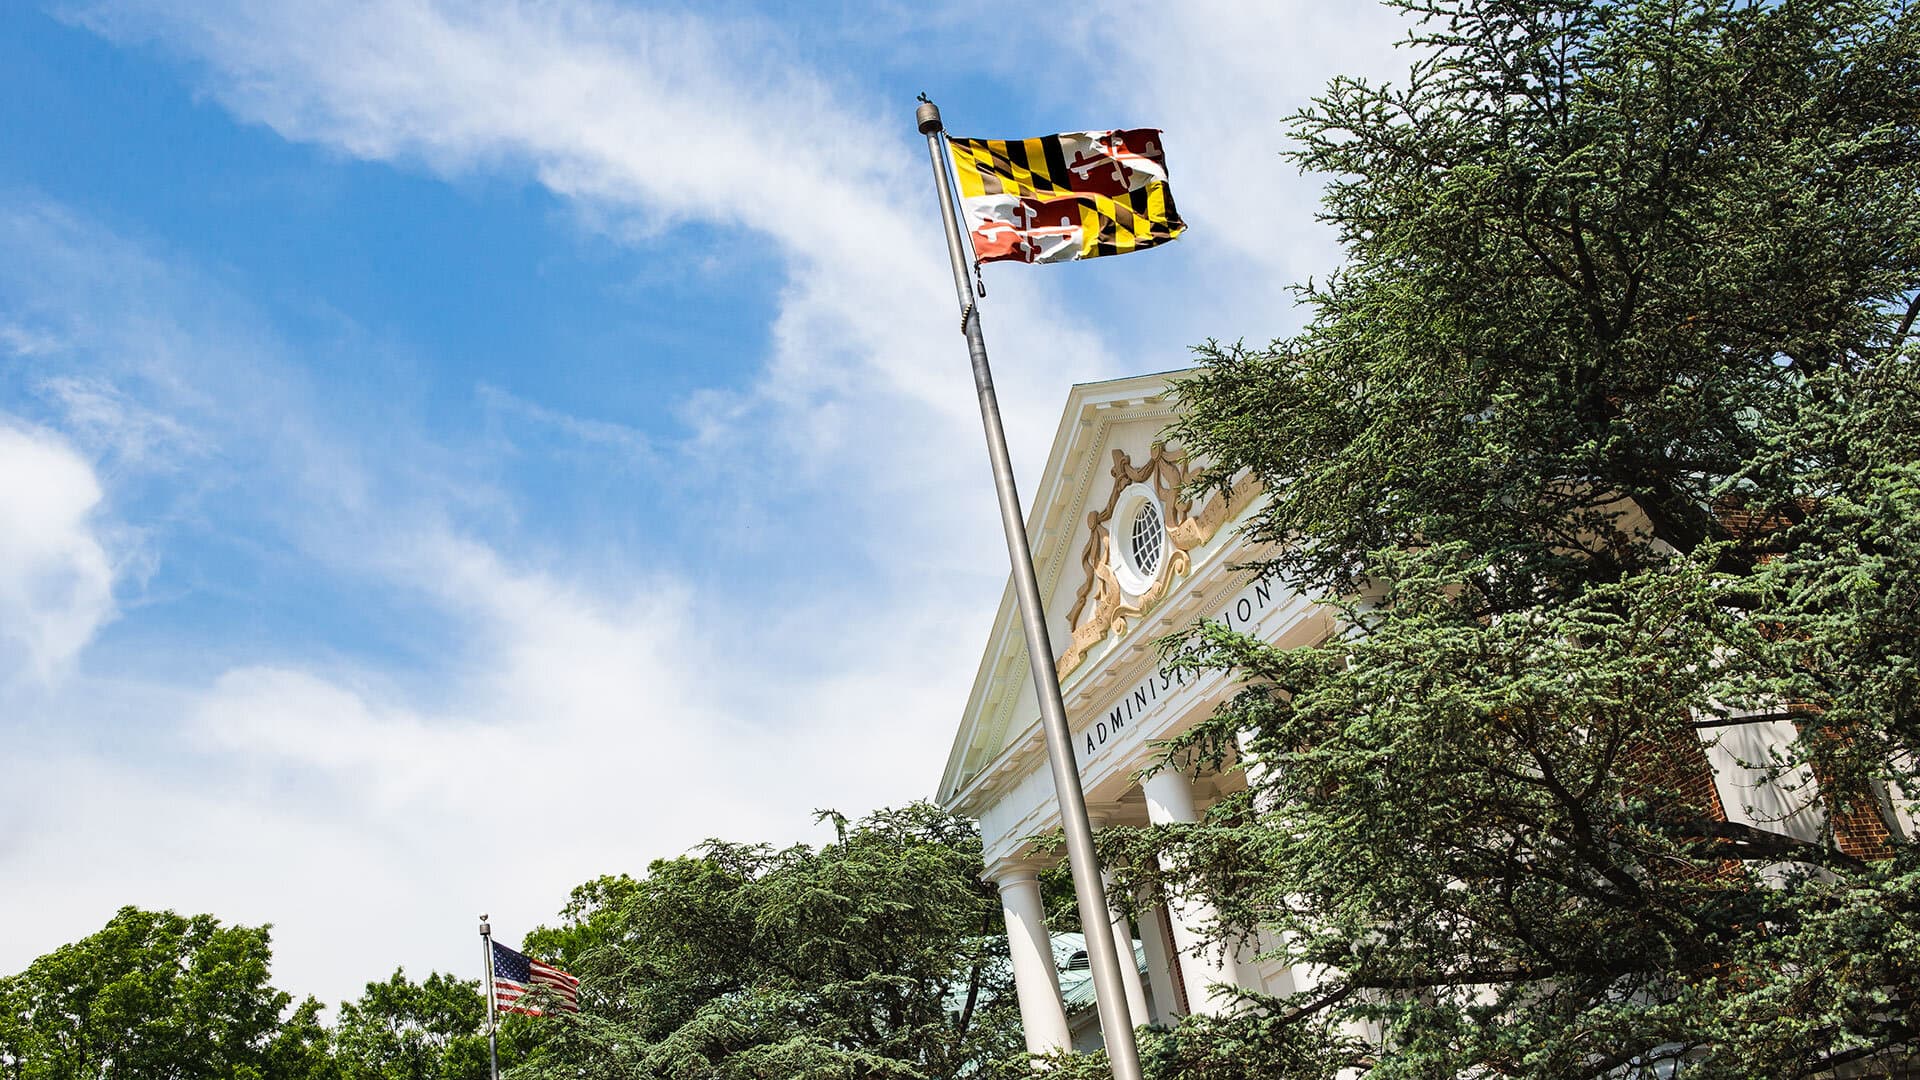 Main Administration Building with Maryland flag